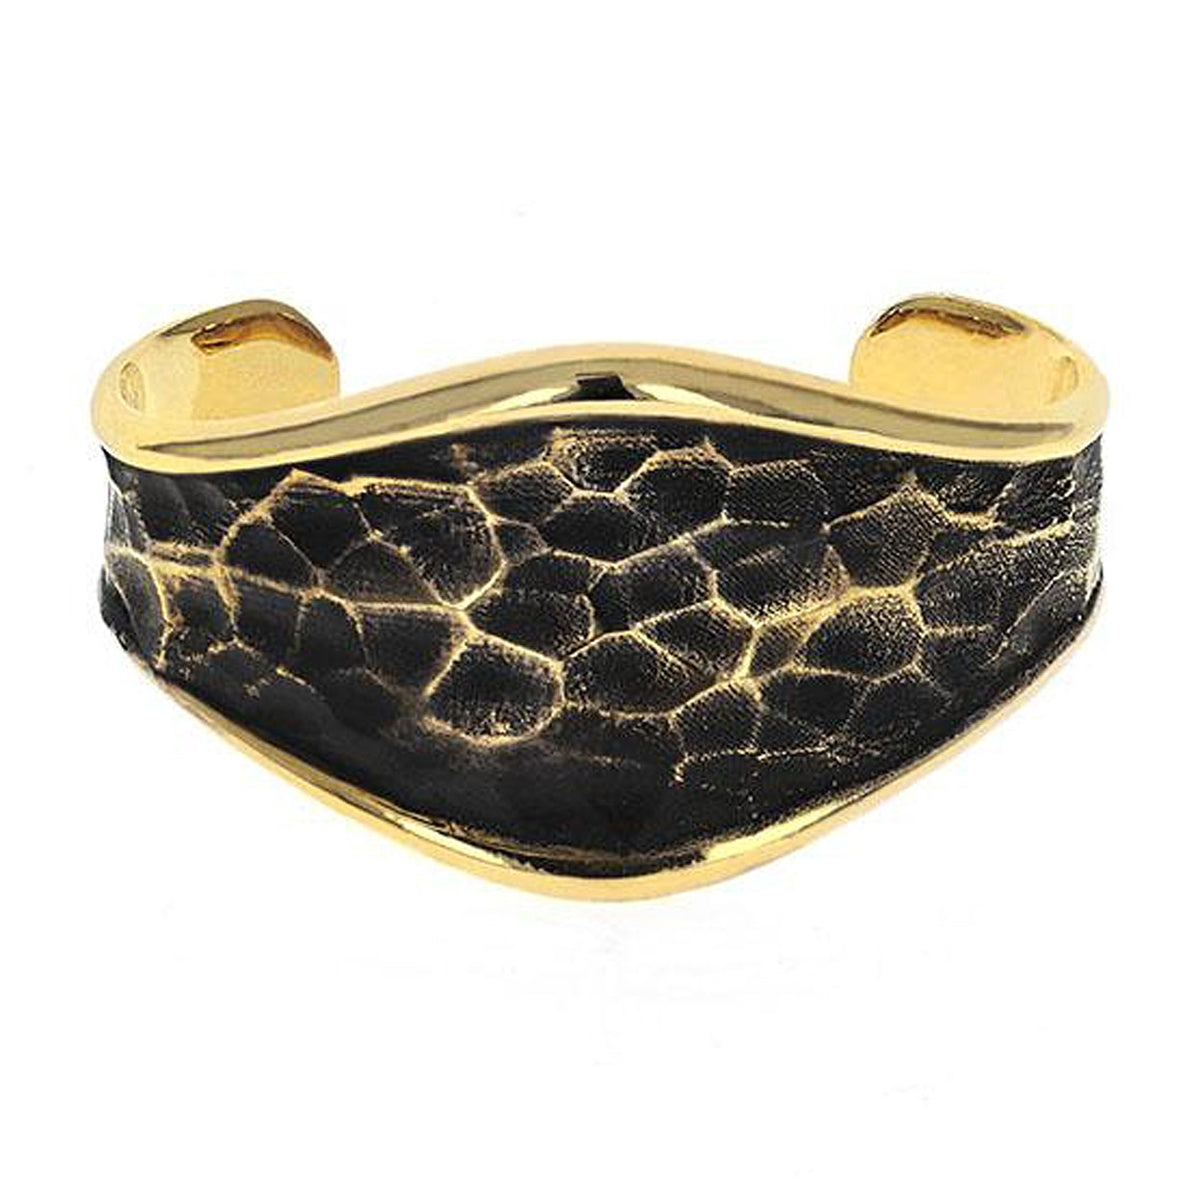 KING BABY - &quot;HAMMERED SHIELD&quot; Textured Cuff in Gold Alloy